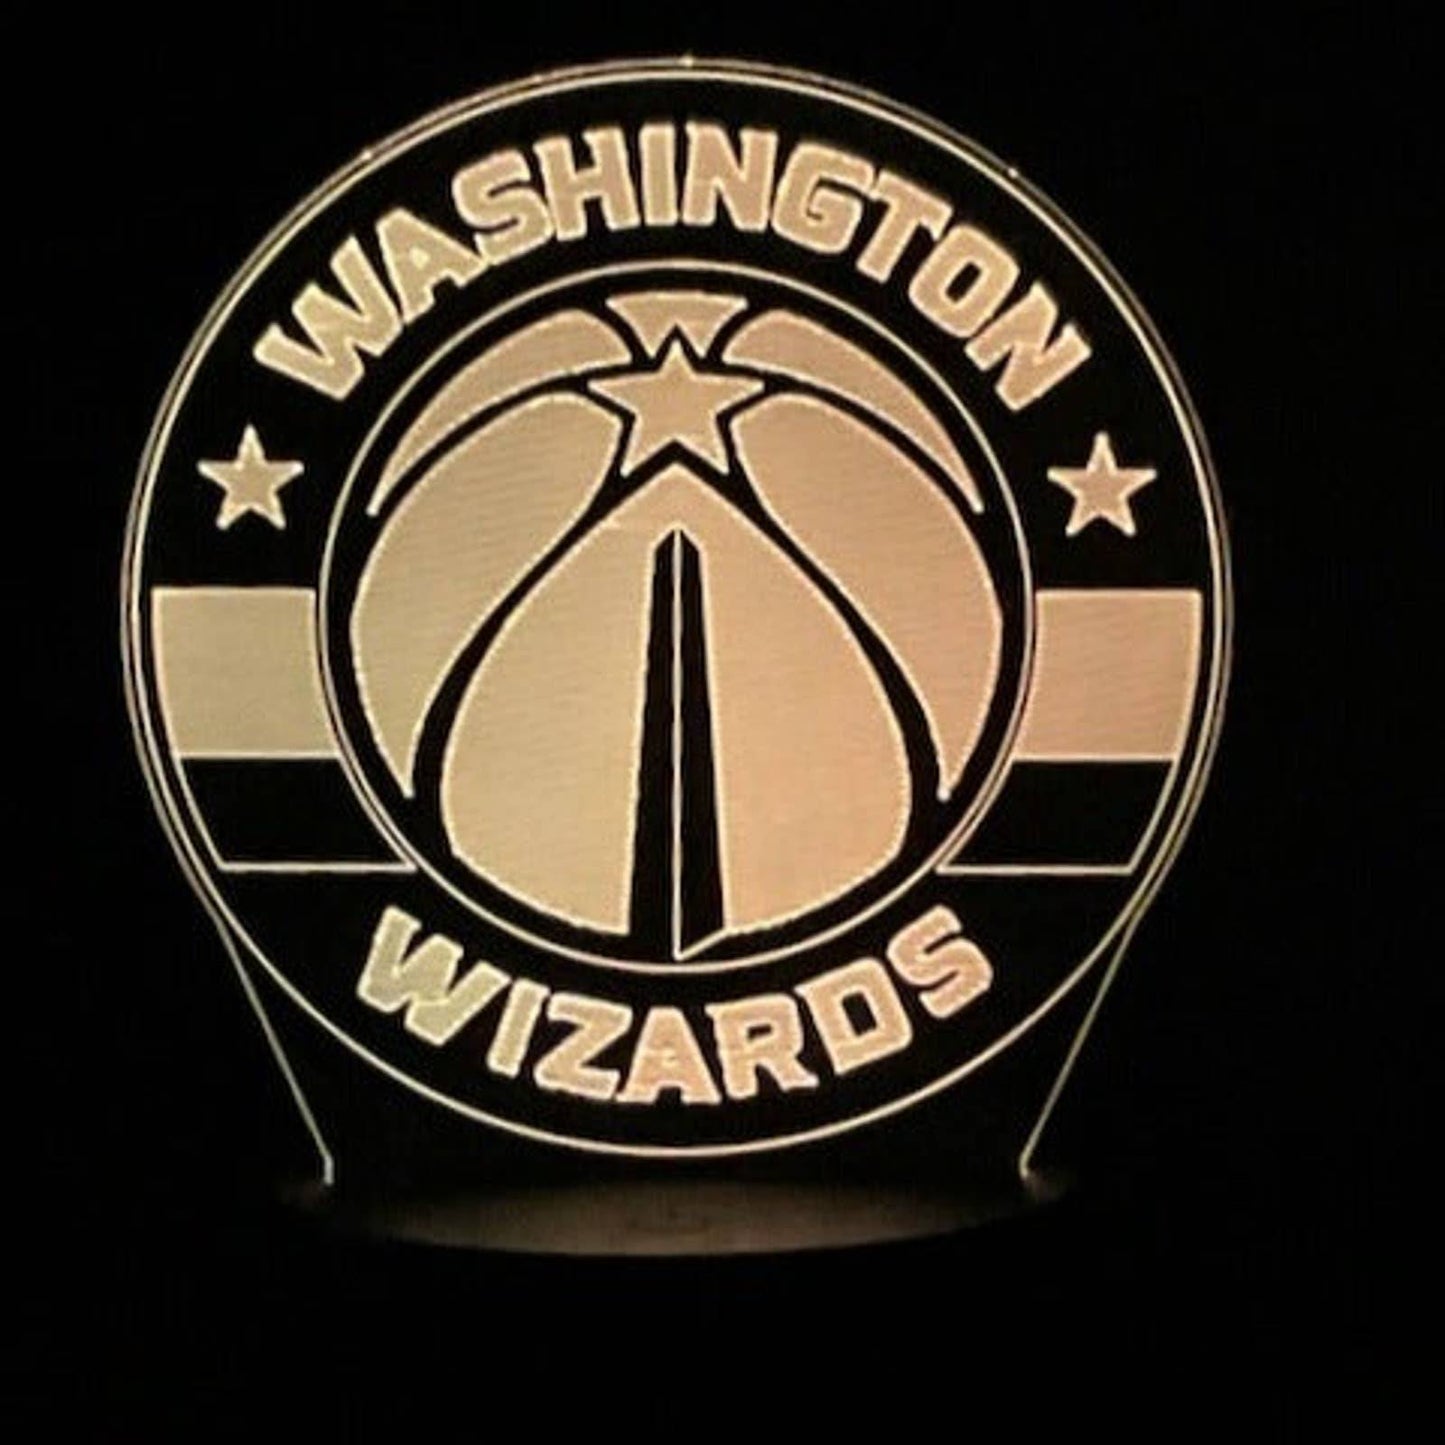 Washington Wizards 3D LED Night-Light 7 Color Changing Lamp w/ Touch Switch